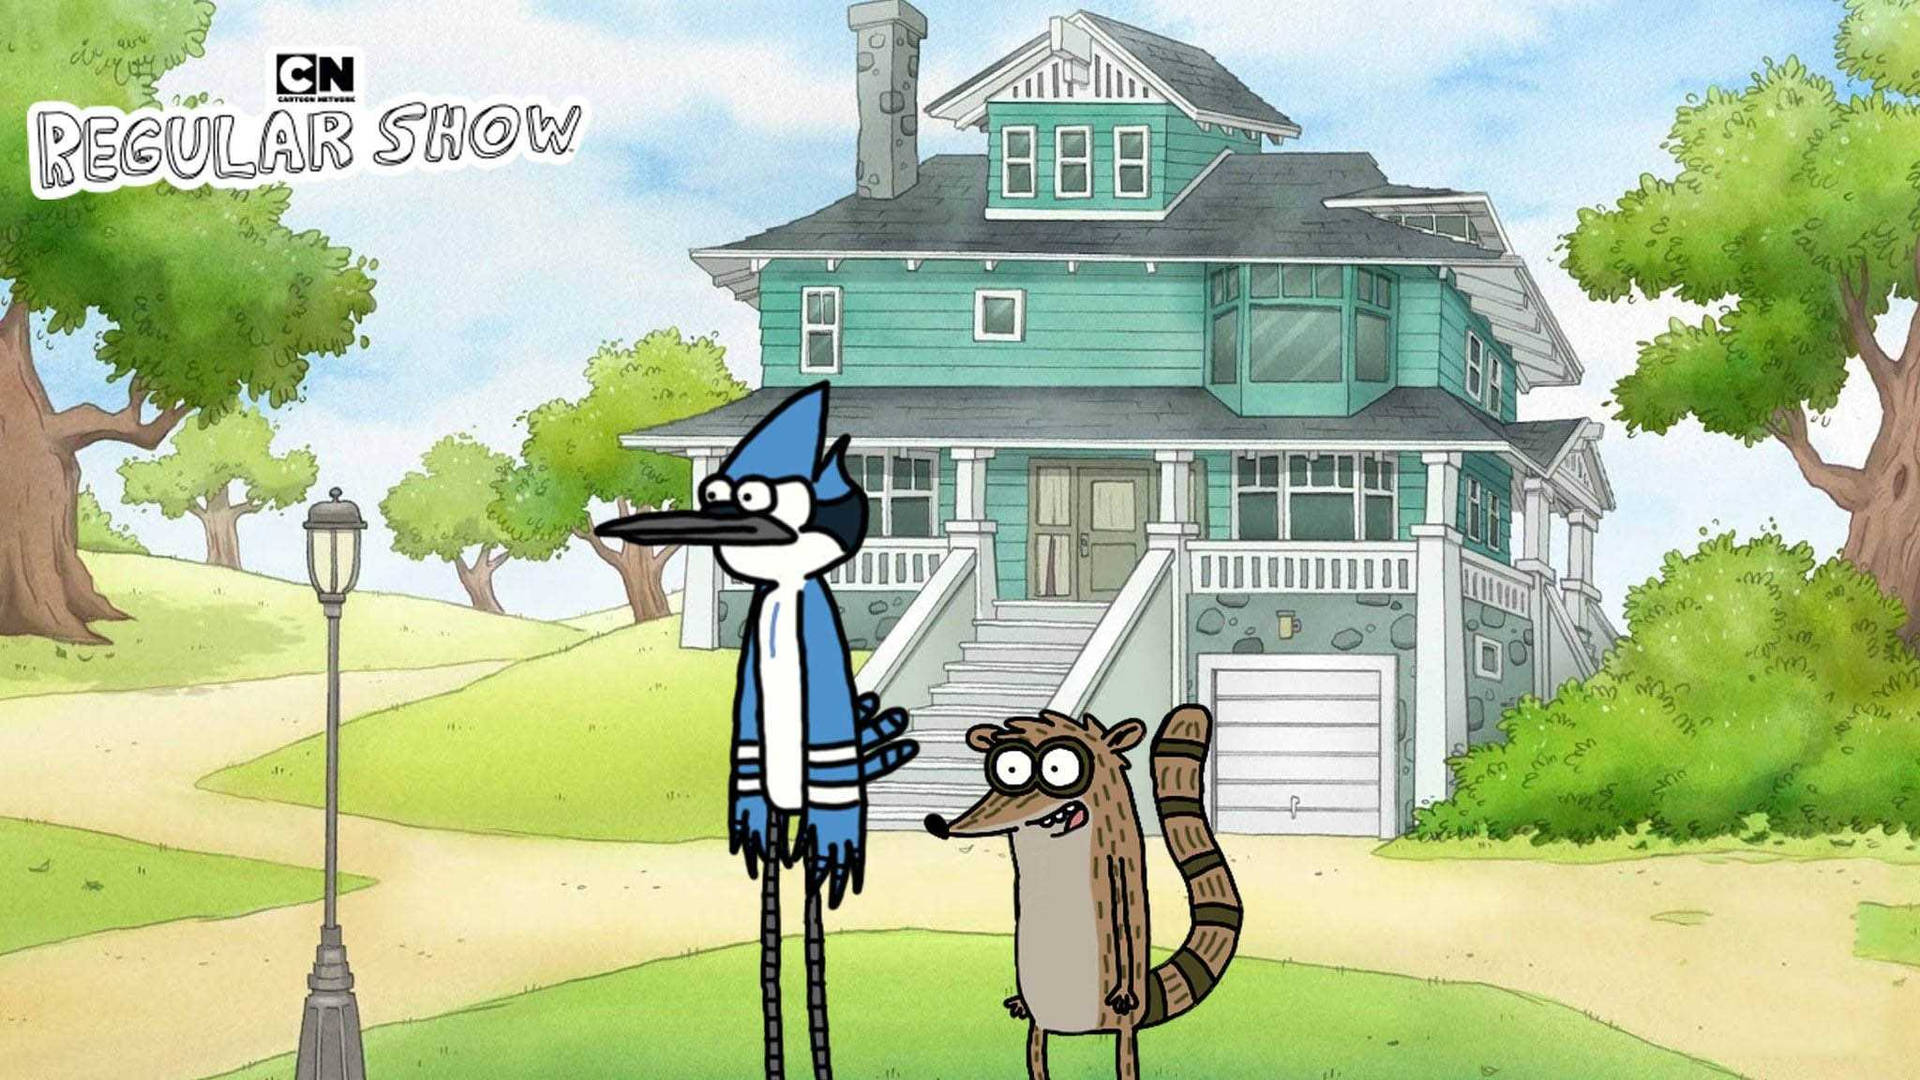 Mordecai And Rigby Wallpapers